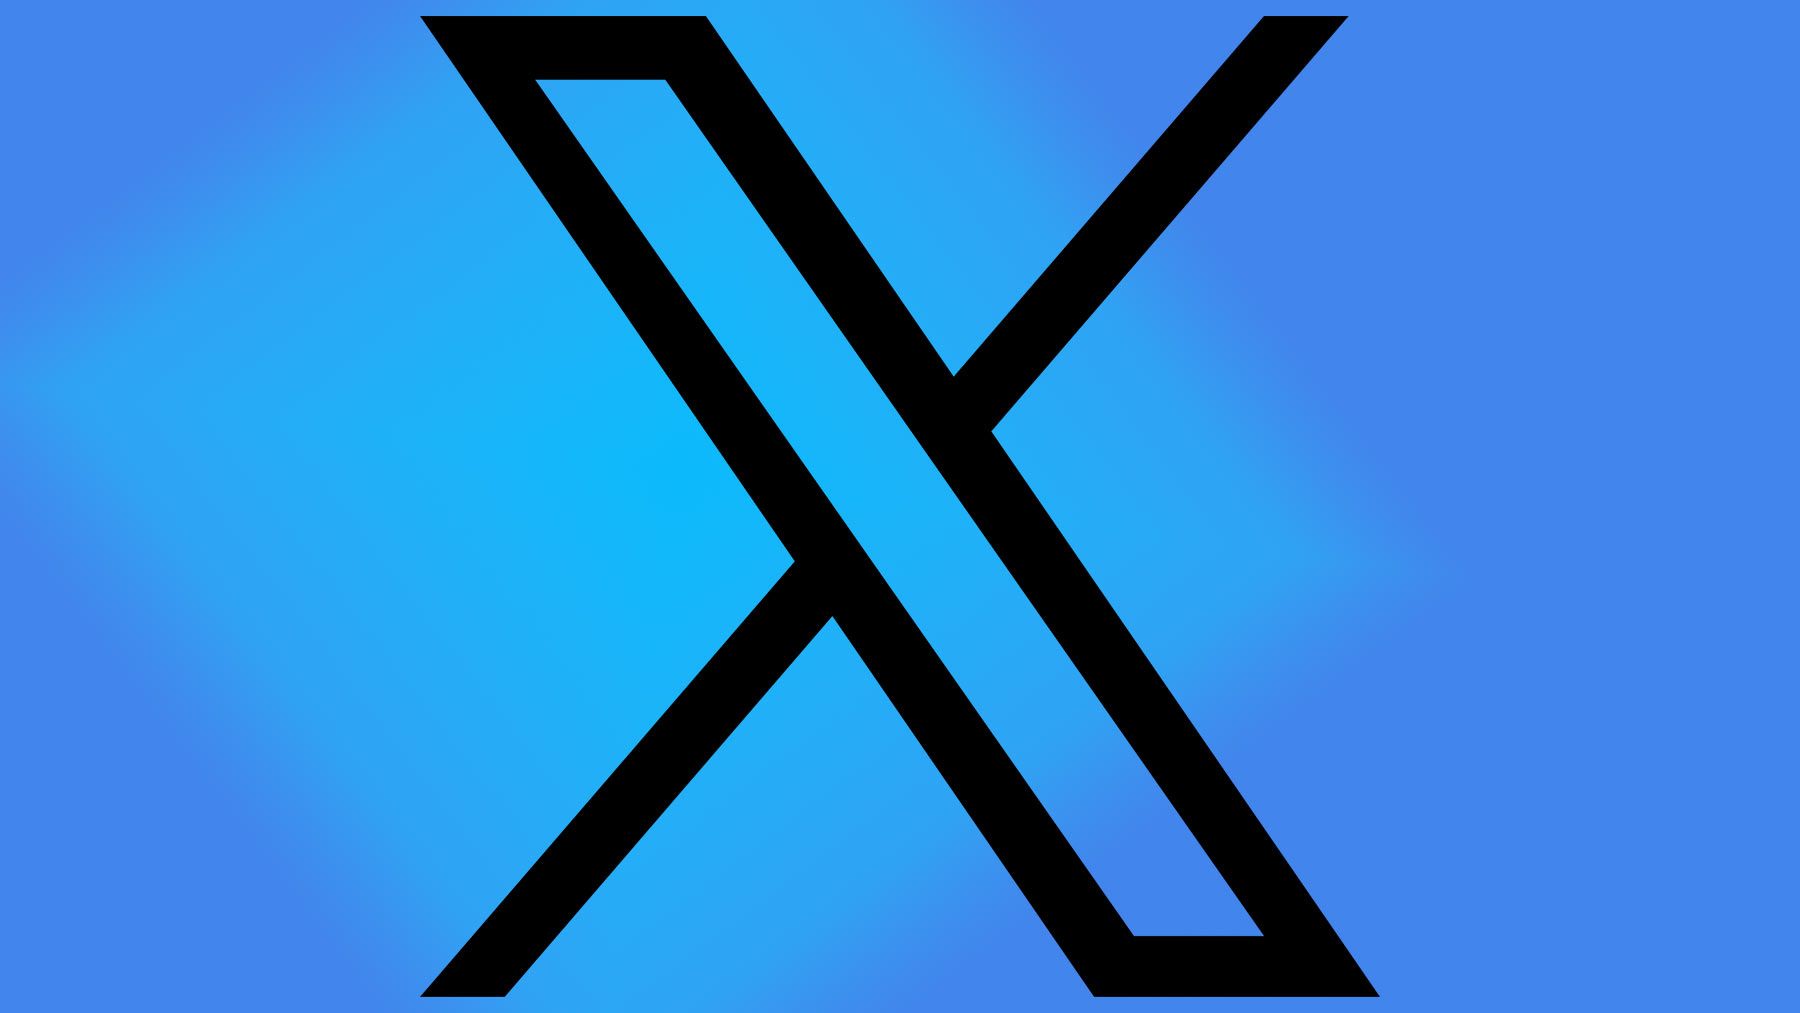 The new X logo in front of a blue background